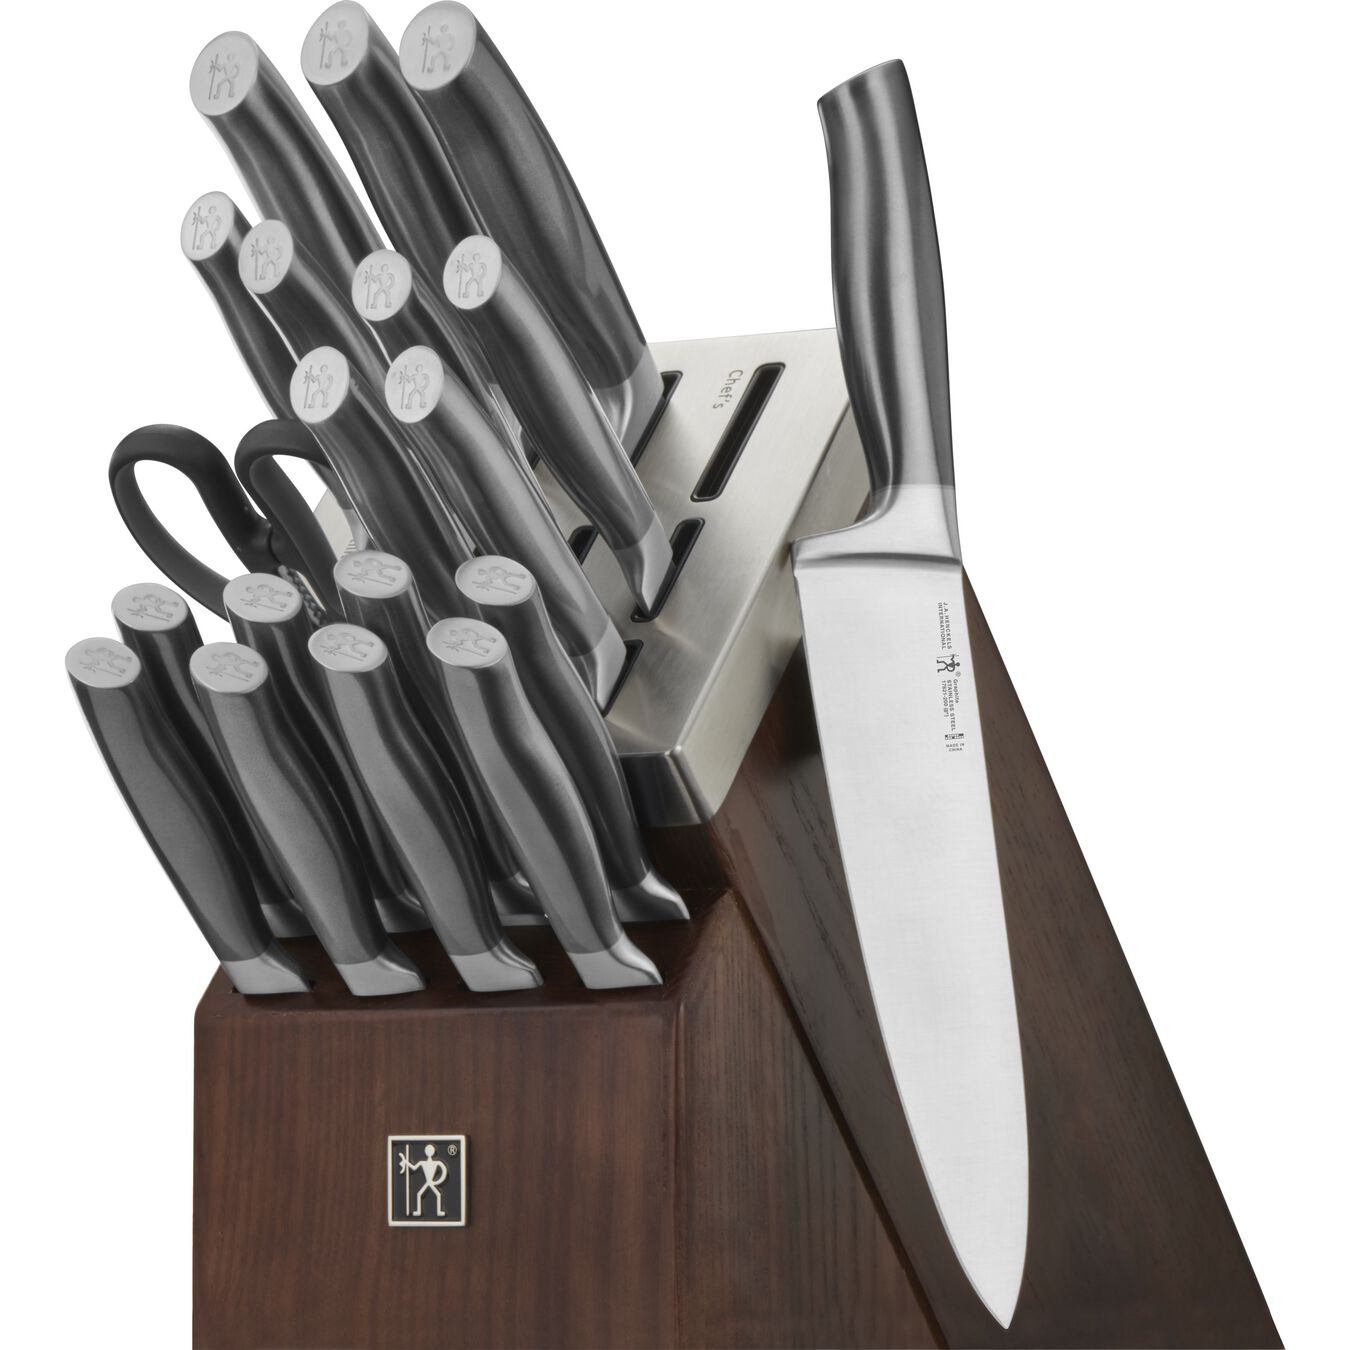 Henckels Graphite 20-pc Self-Sharpening Knife Set with Block - Stainless  Steel